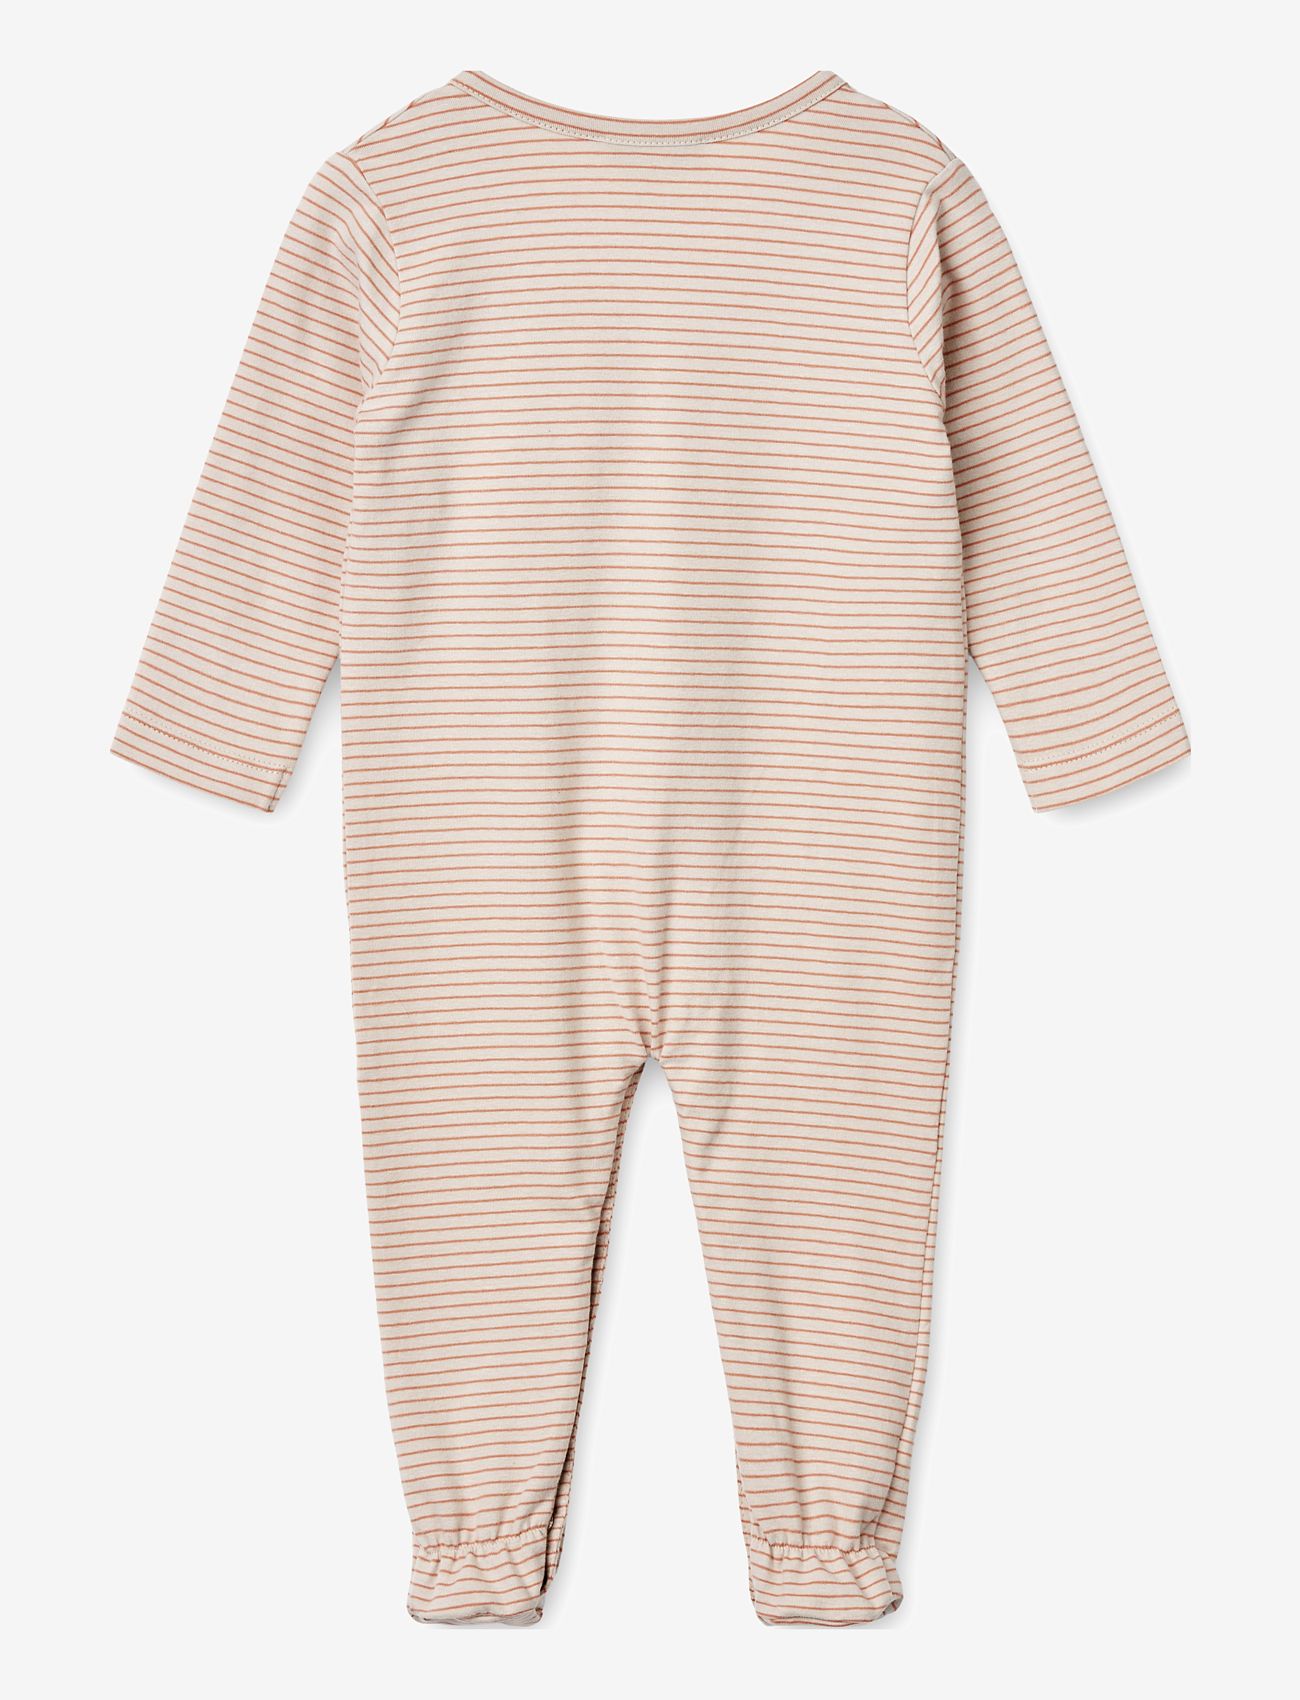 Liewood - Bolde Baby Stripe Jumpsuit - schlafoveralls - y/d stripe sandy / tuscany rose - 1